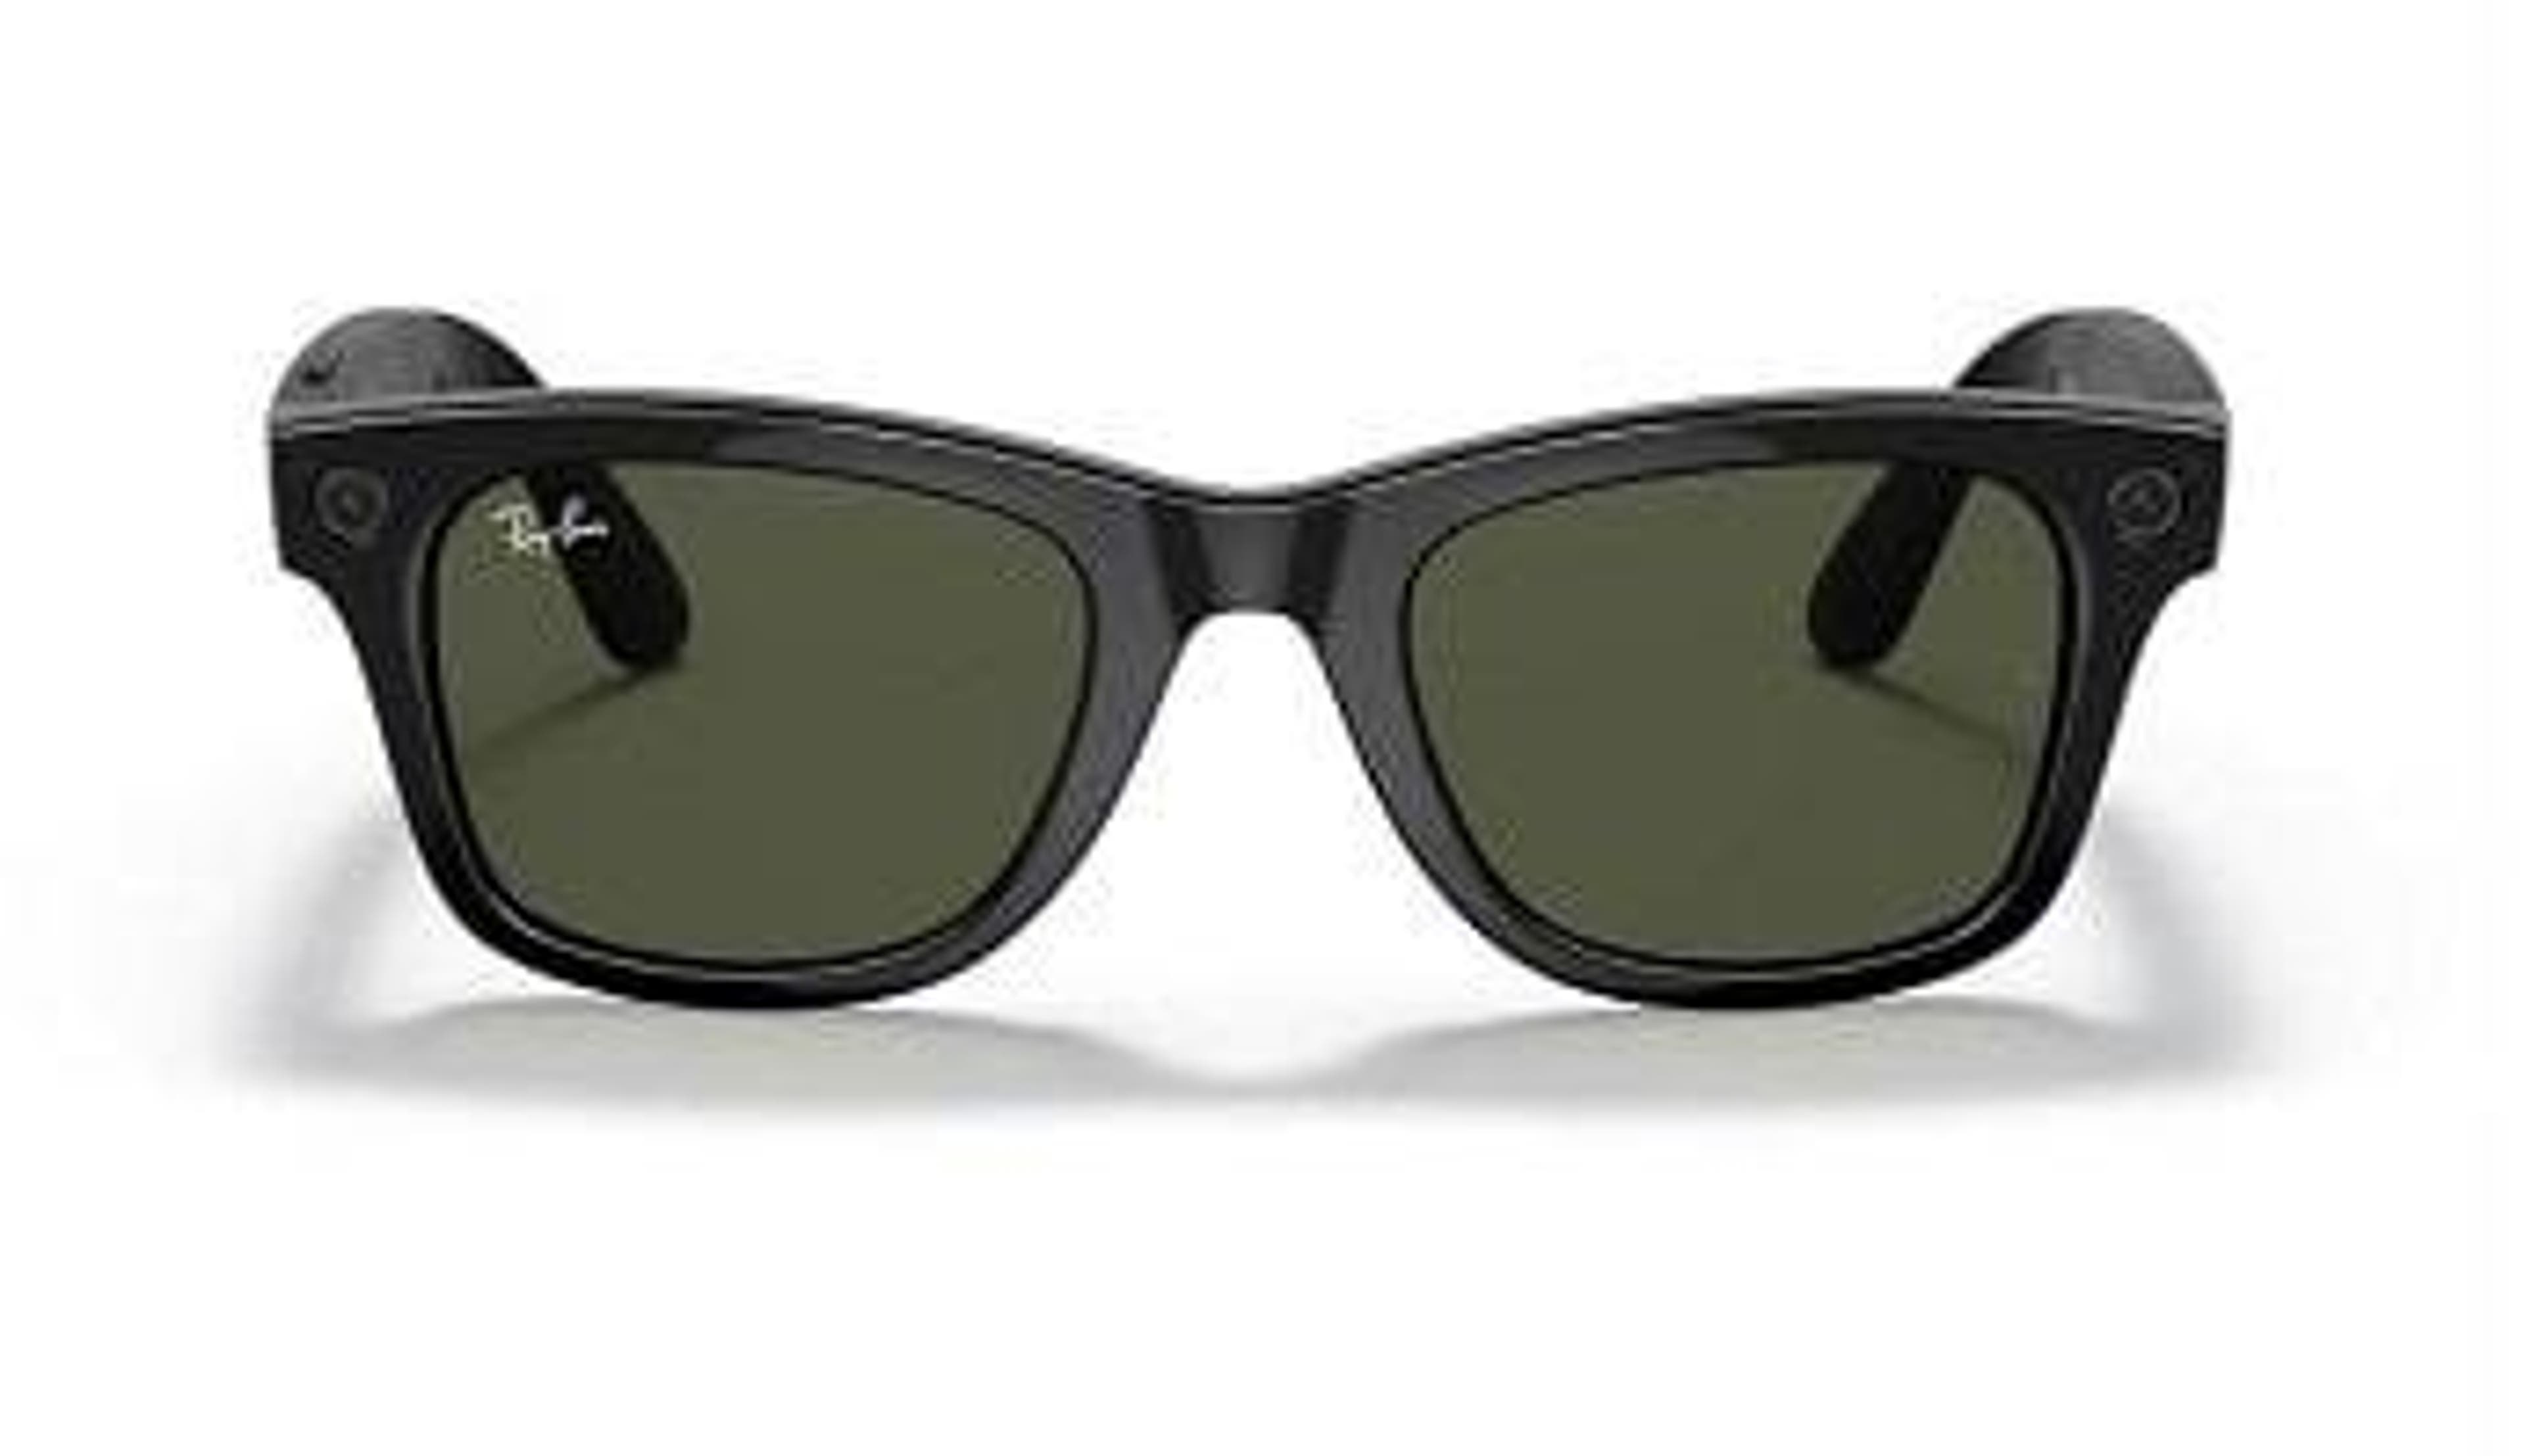  Sunglasses from the Ray Ban Promo sales 